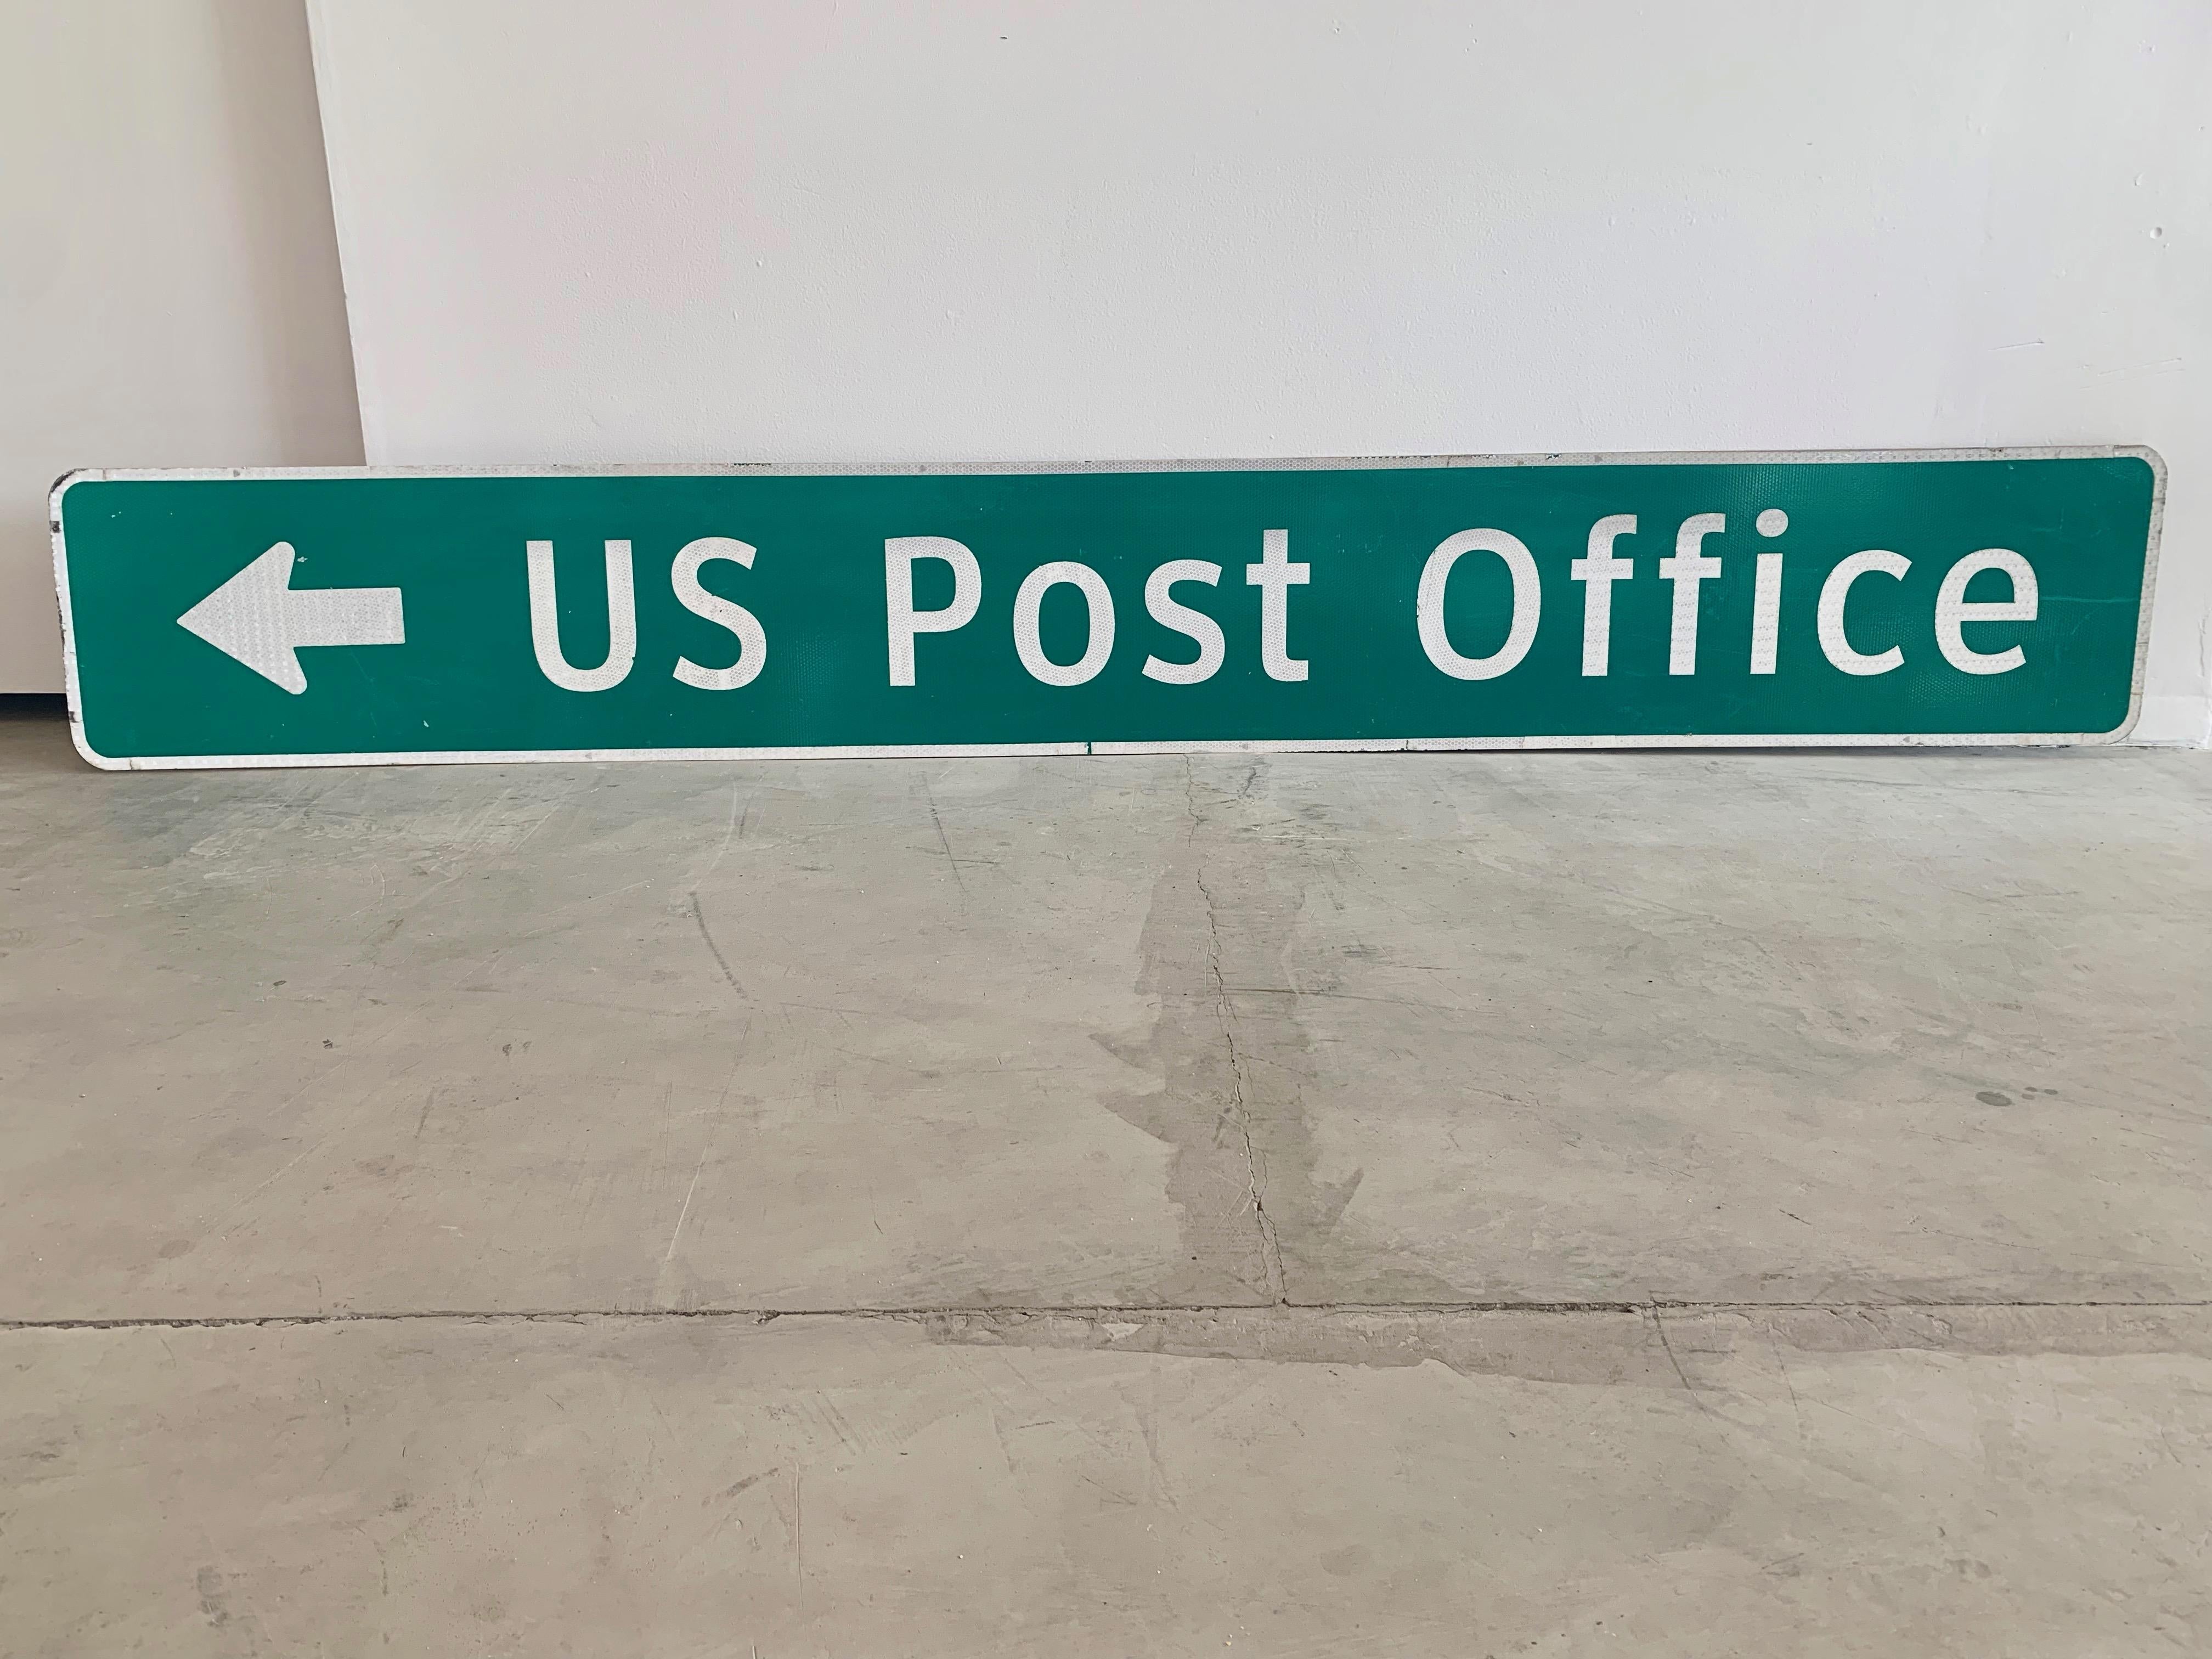 Massive US Post Office Highway sign from the south. Steel sign with reflective lettering. Great coloring and graphics. Good vintage condition. Measure: 7 foot.